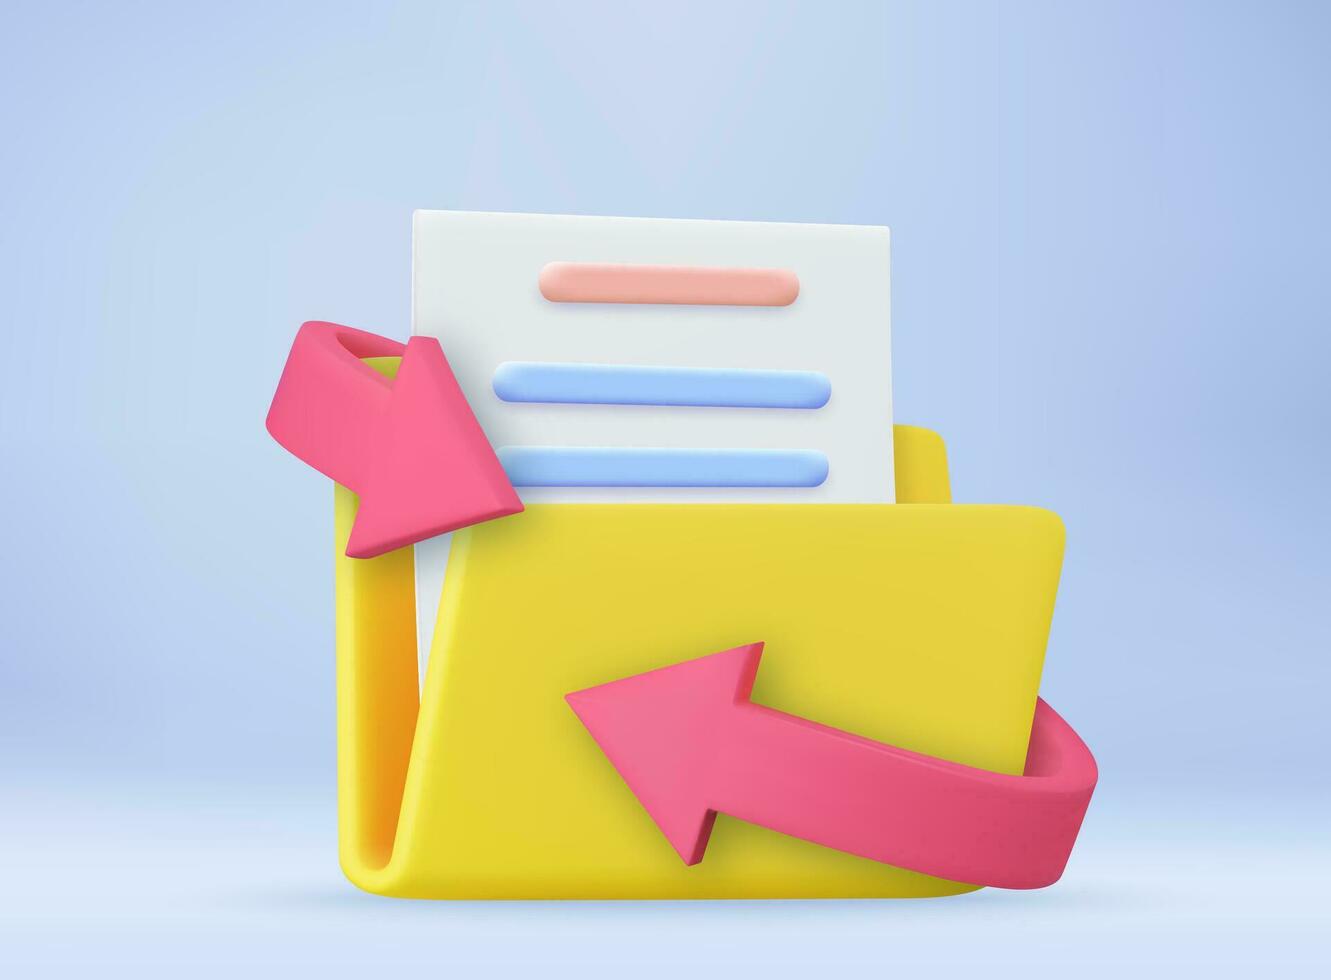 3d Yellow folder with files and arrow. File transfer concept. File sharing or sending document, documents management, data storage, Copy files, Move a file. 3d rendering. Vector illustration